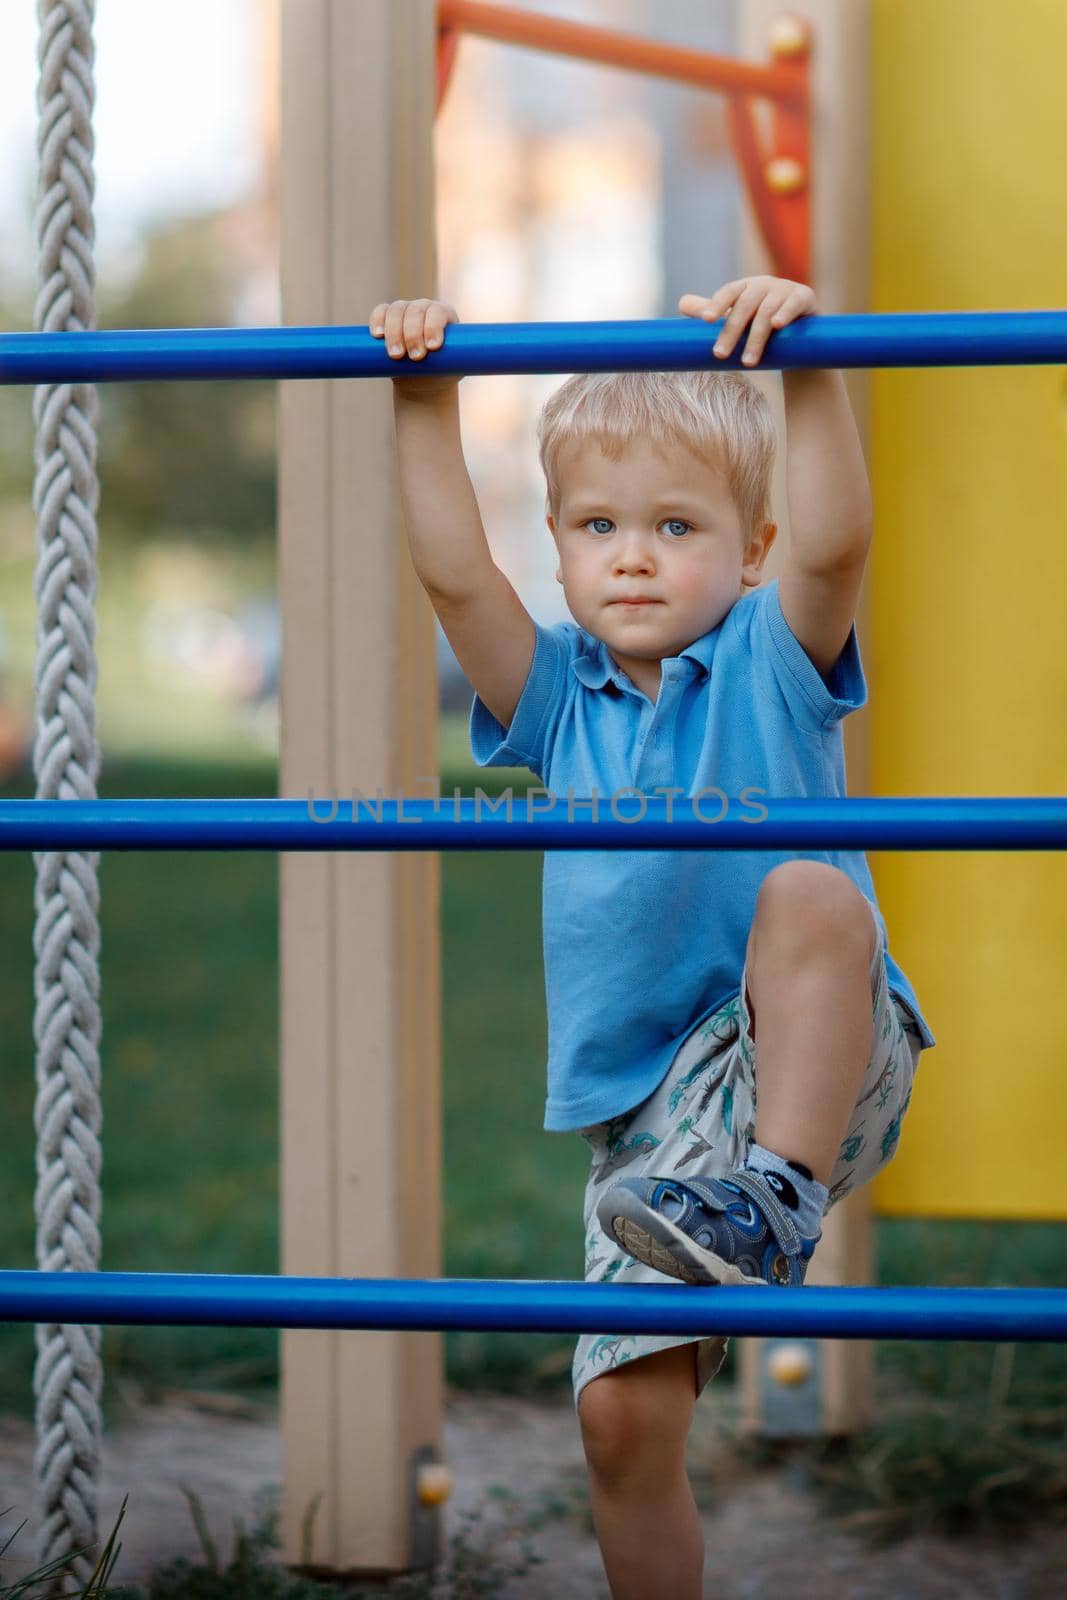 Little boy climbing on a blue ladder and looks to camera by Lincikas